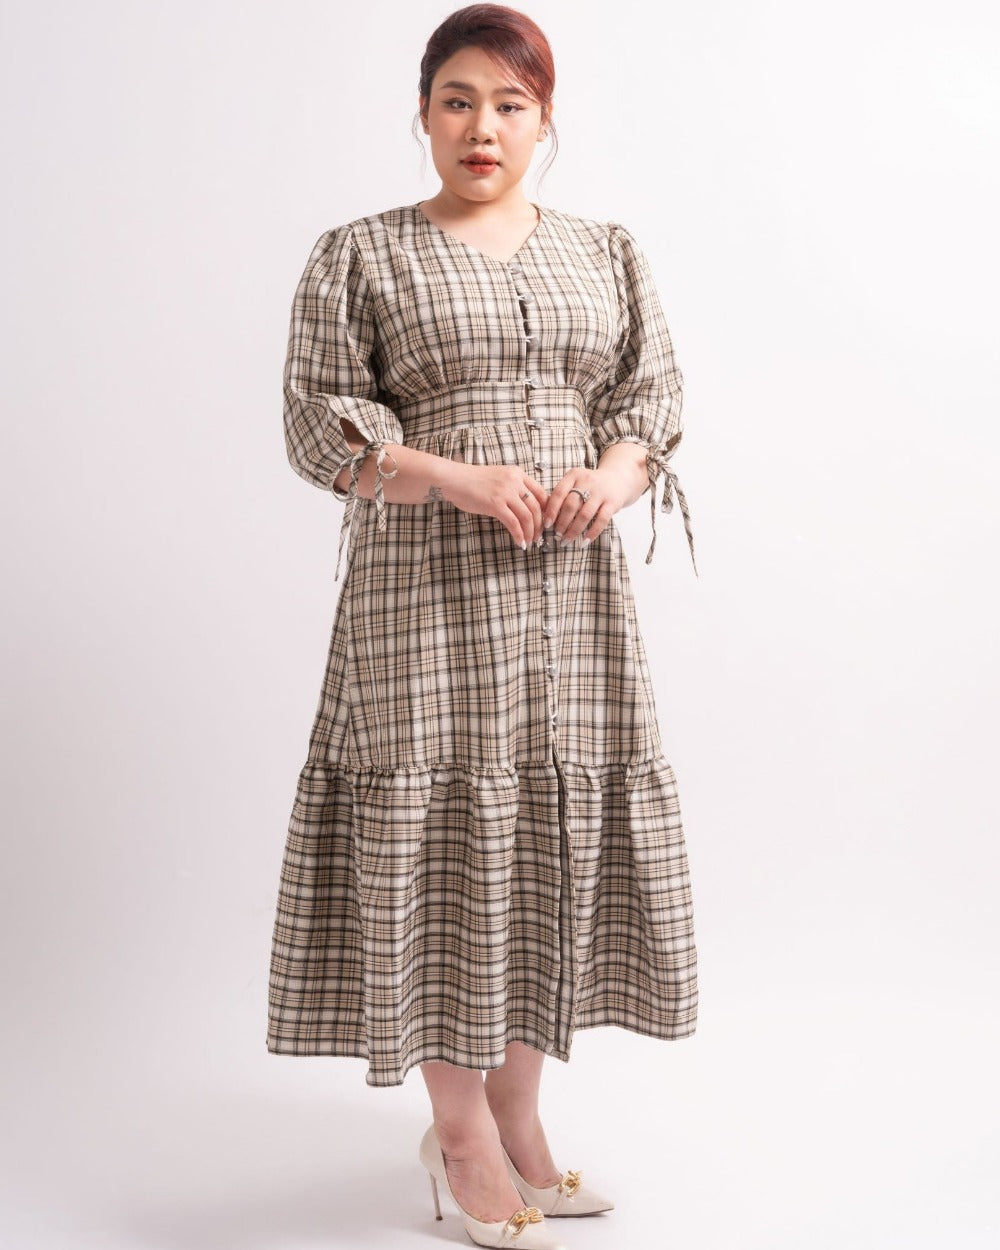 Women's gingham dress with pockets, Olive, 2/3 sleeves Perth, Au